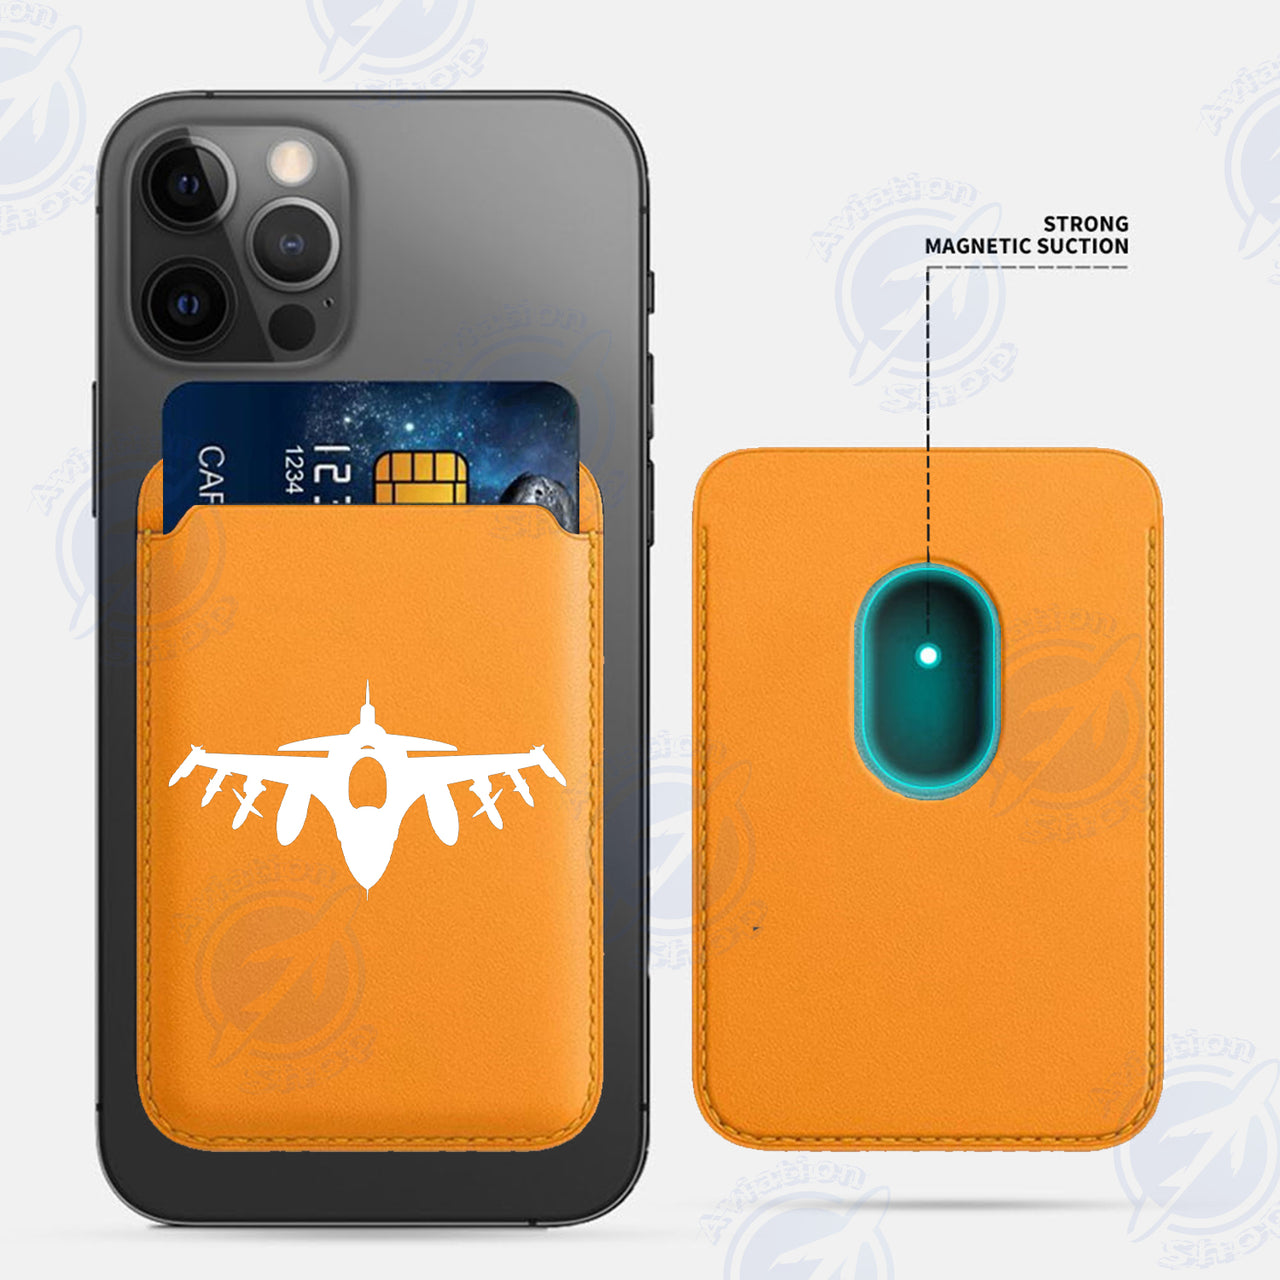 Fighting Falcon F16 Silhouette iPhone Cases Magnetic Card Wallet